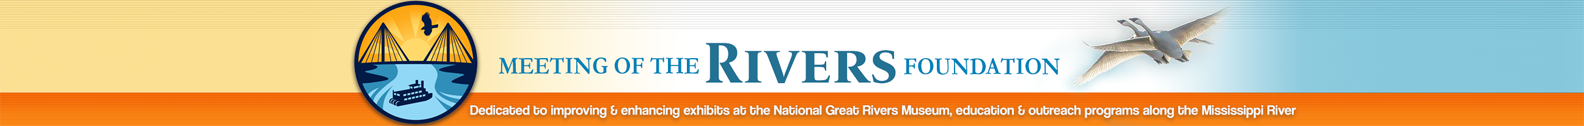 Meeting of the Rivers Foundation Logo